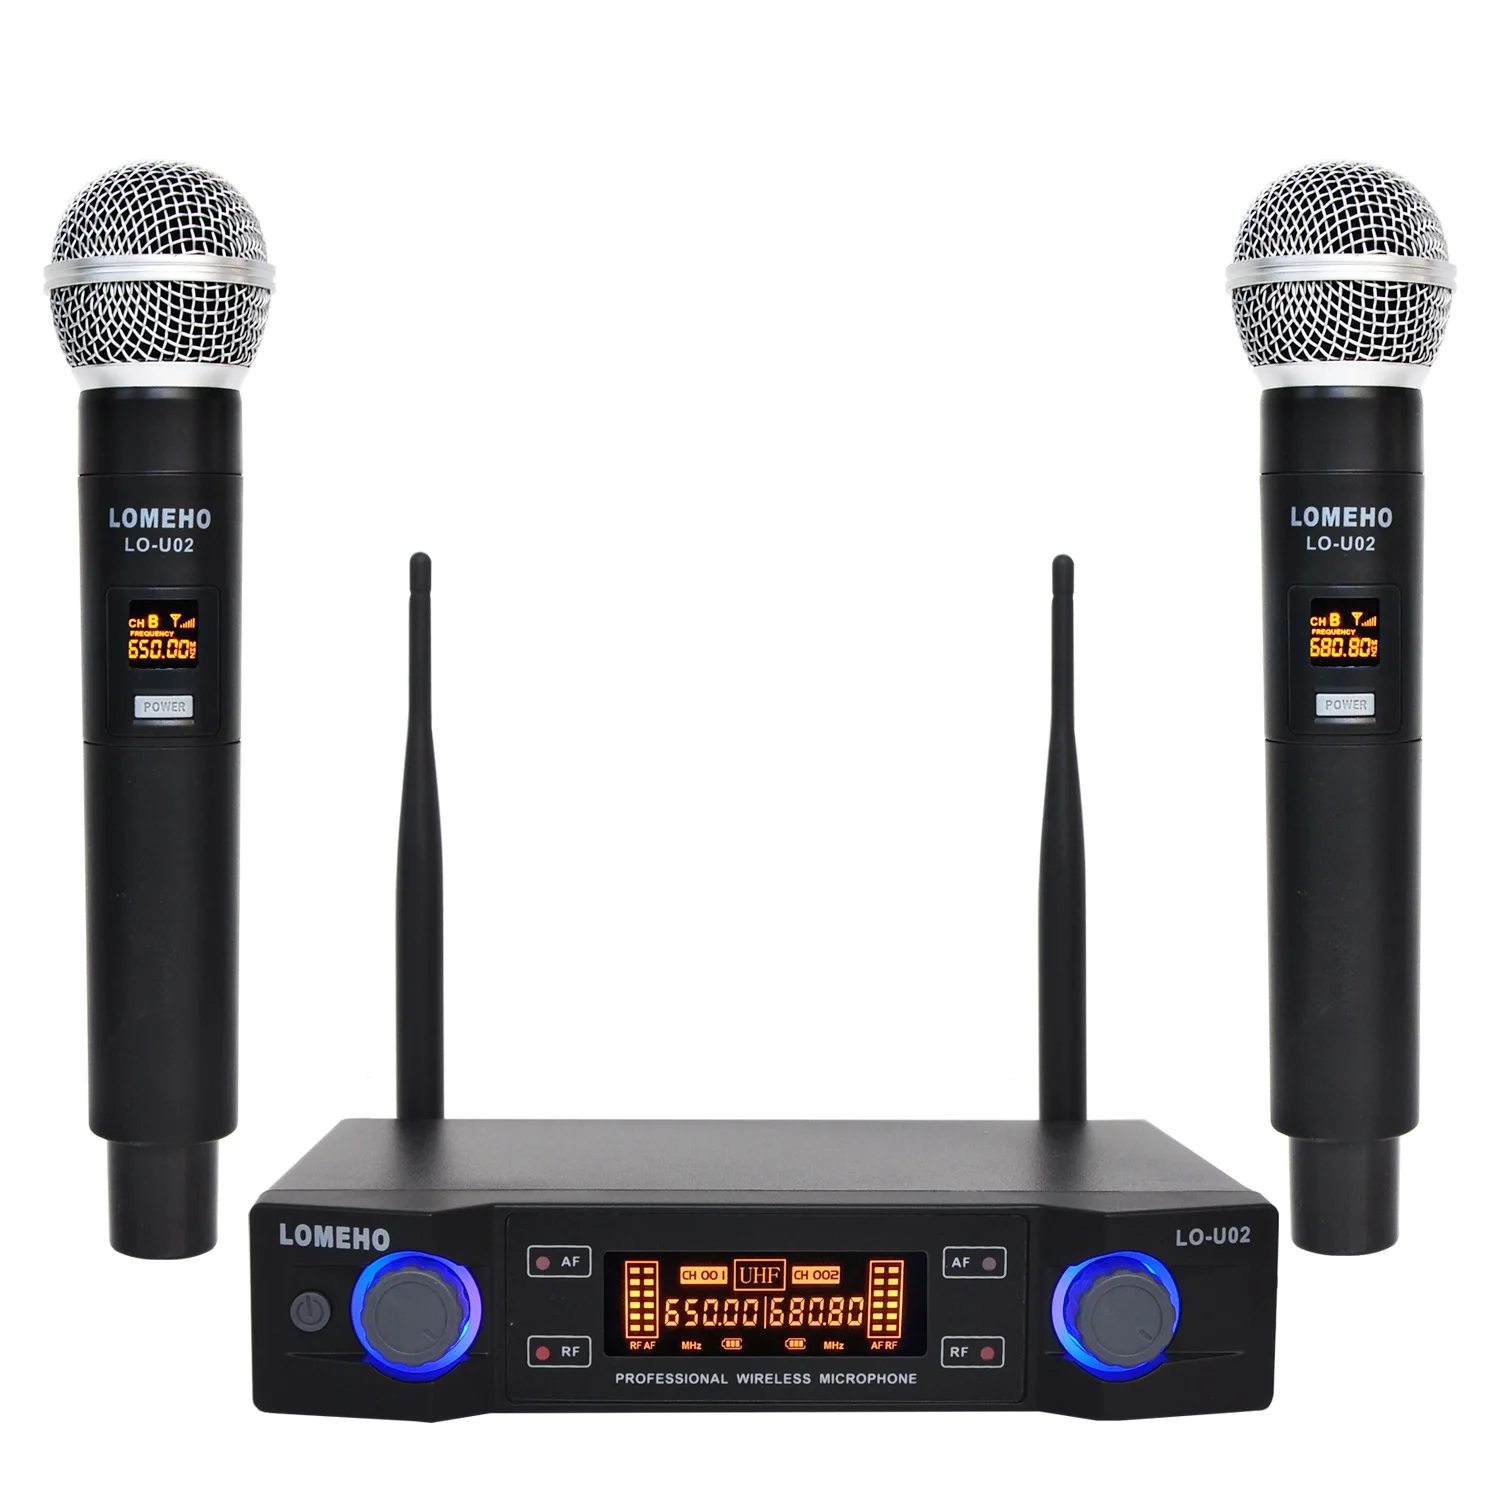 LO-U02 Easy-to-use Professional 2 Handheld UHF Frequencies Dynamic Capsule 2 Channel Wireless Microphone for Karaoke System